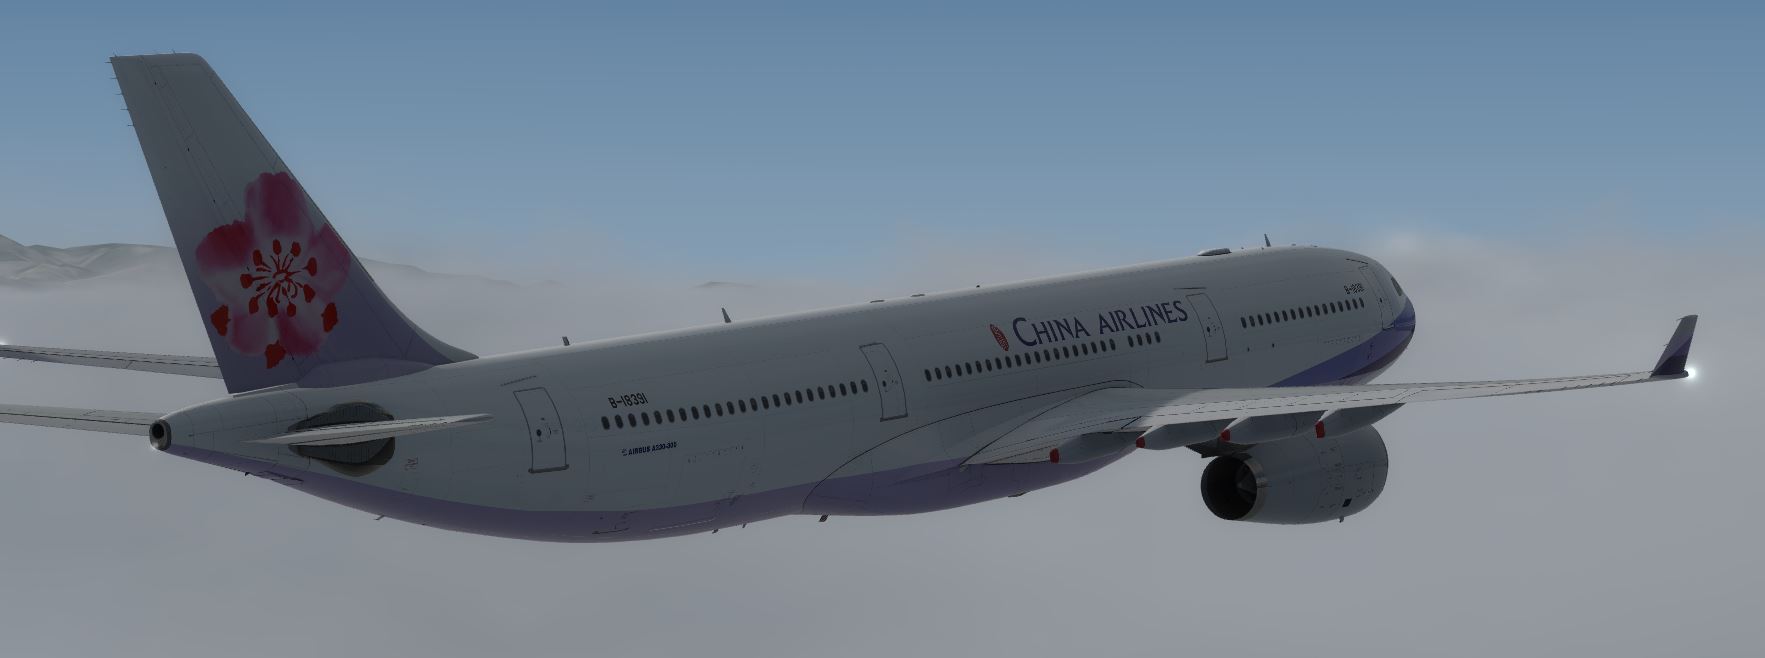 AS A330 ChinaAirline-8219 